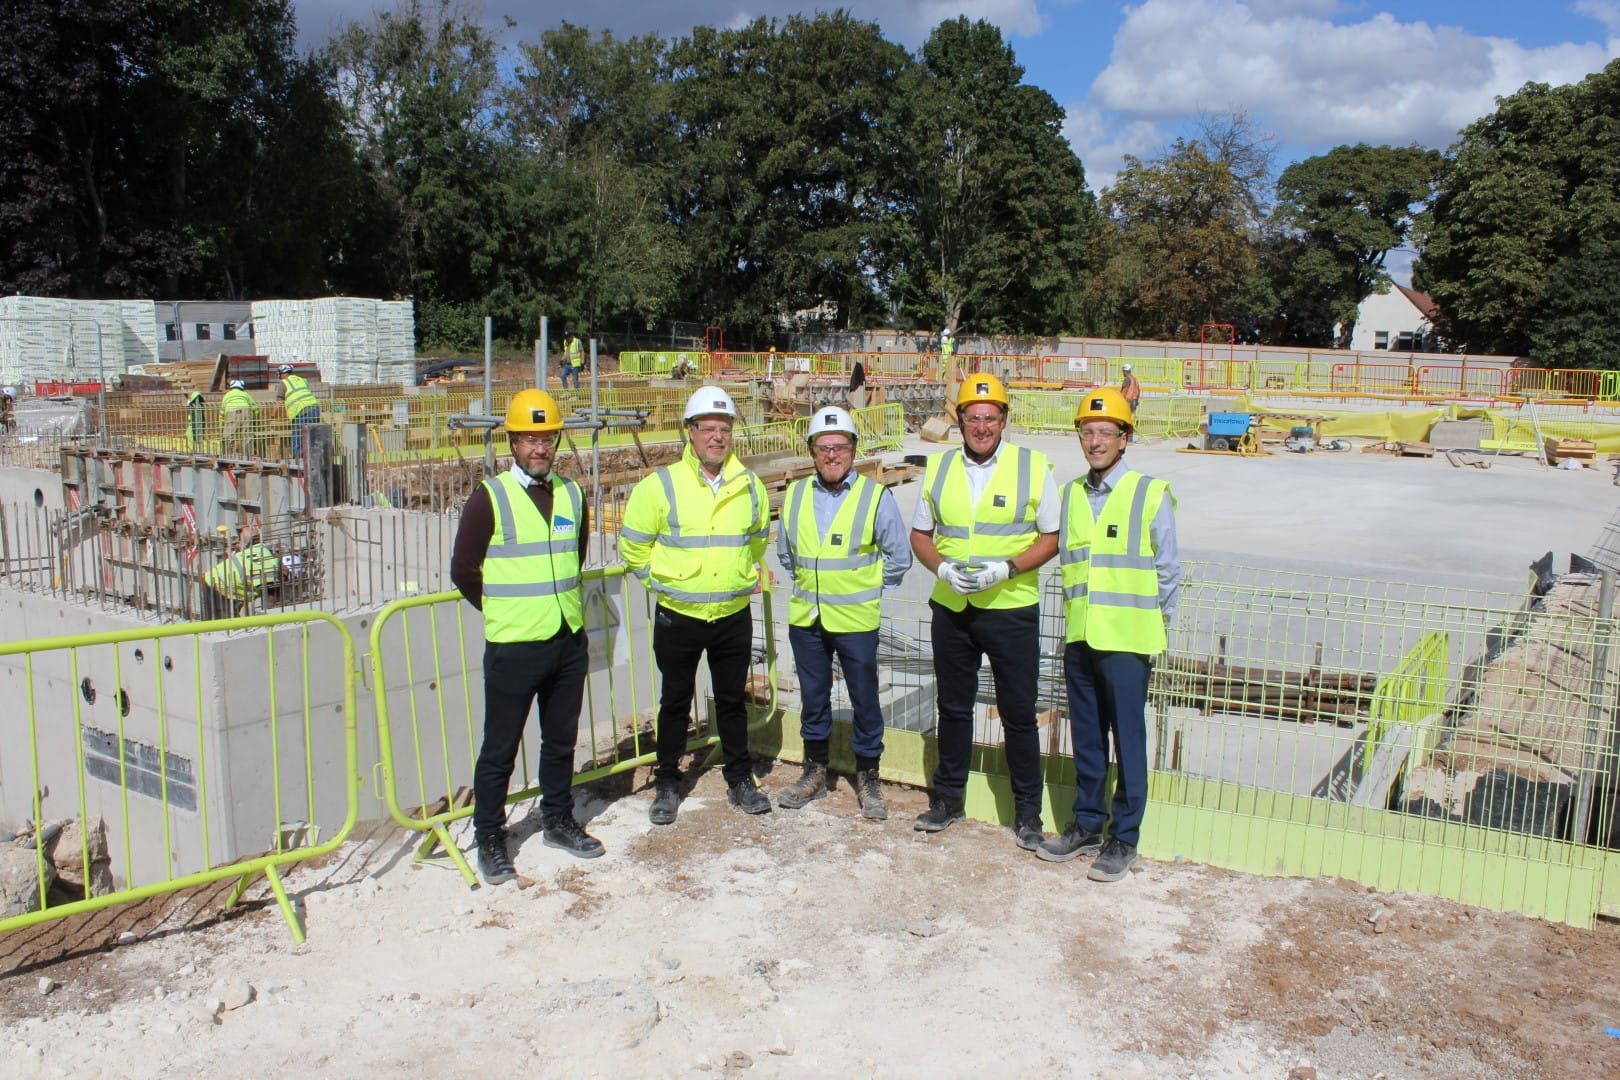 The major and team working on the Knaresborough project